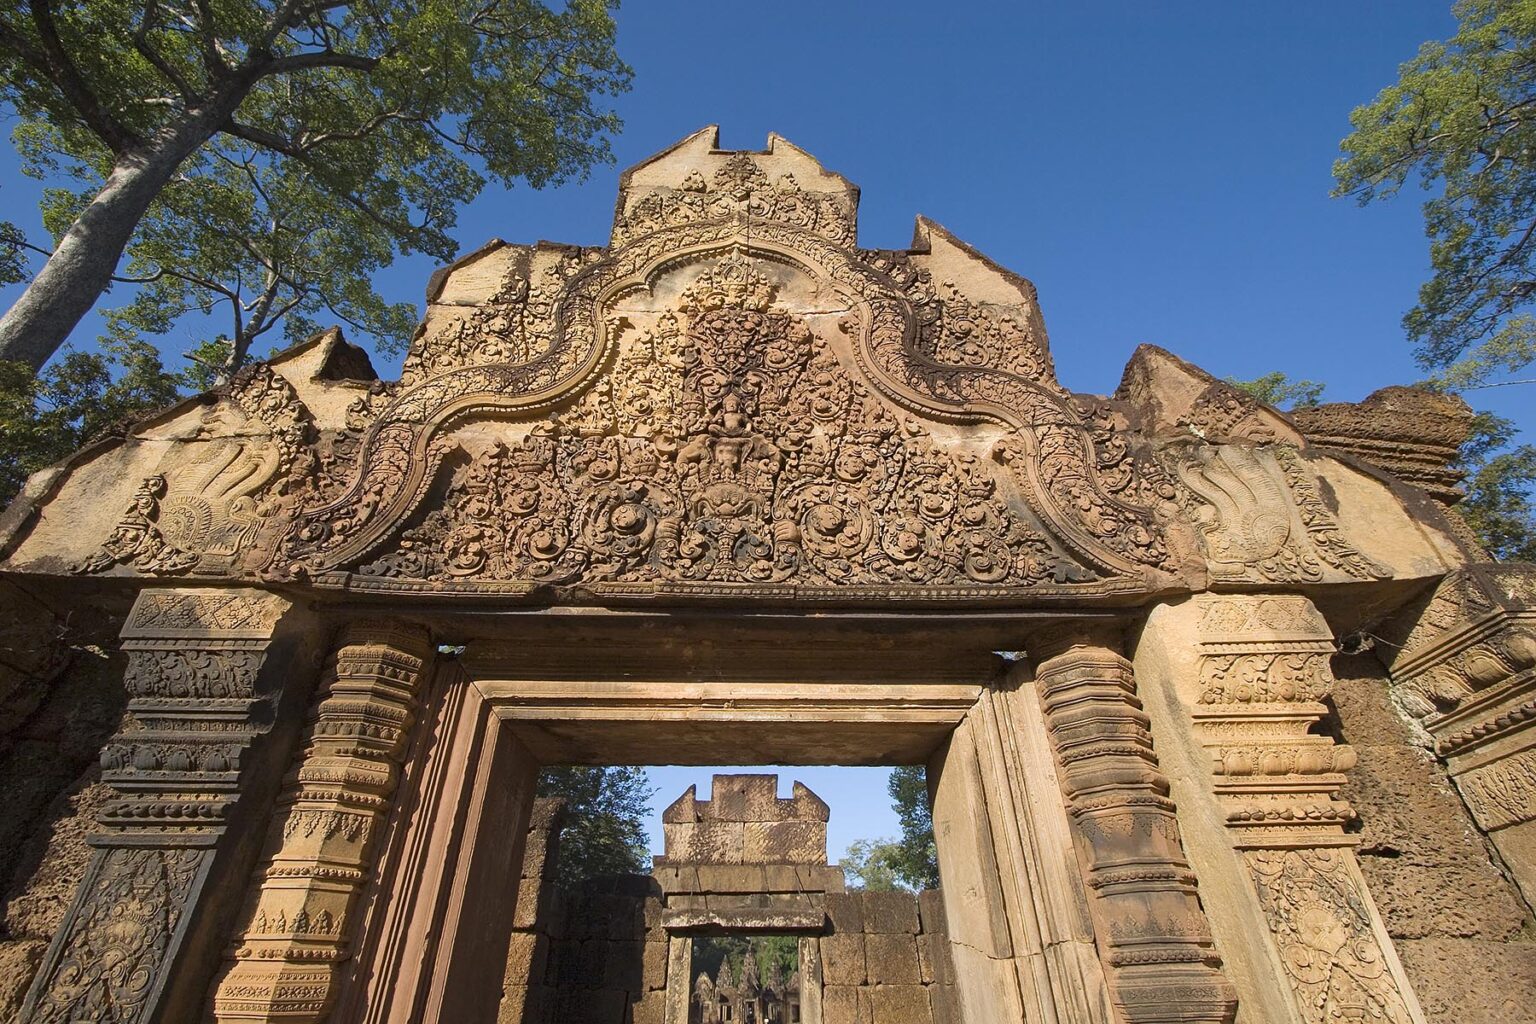 East Gopura of Banteay Srei with bas relief in red sandstone, 10th century Khmer architecture at Angkor Wat - Siem Reap, Cambodia